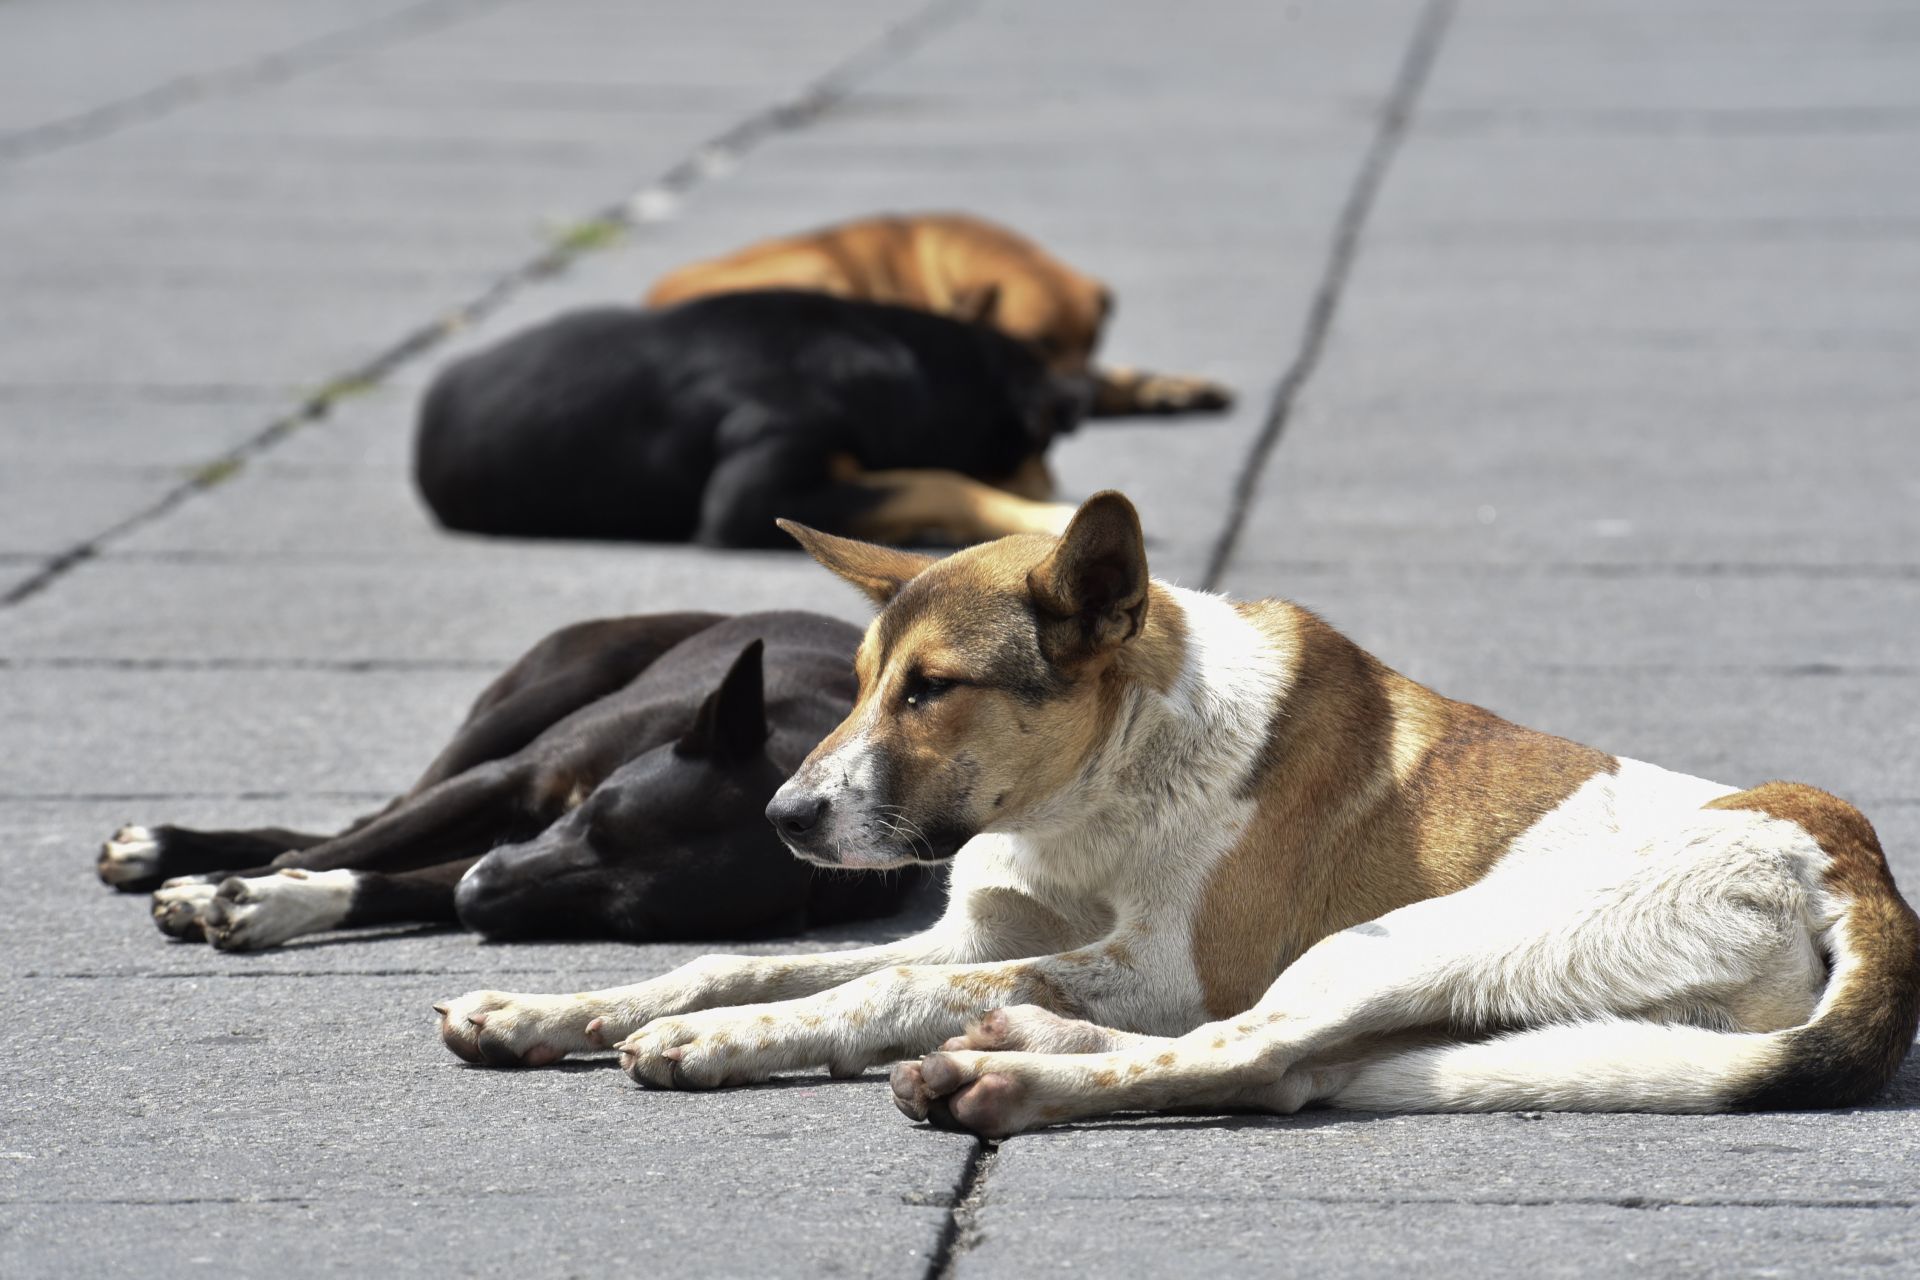 The study analyzed the behavior of stray dogs that had different levels of ancestry from particular breeds (Crisanta Espinosa Aguilar/ Cuartoscuro.com)